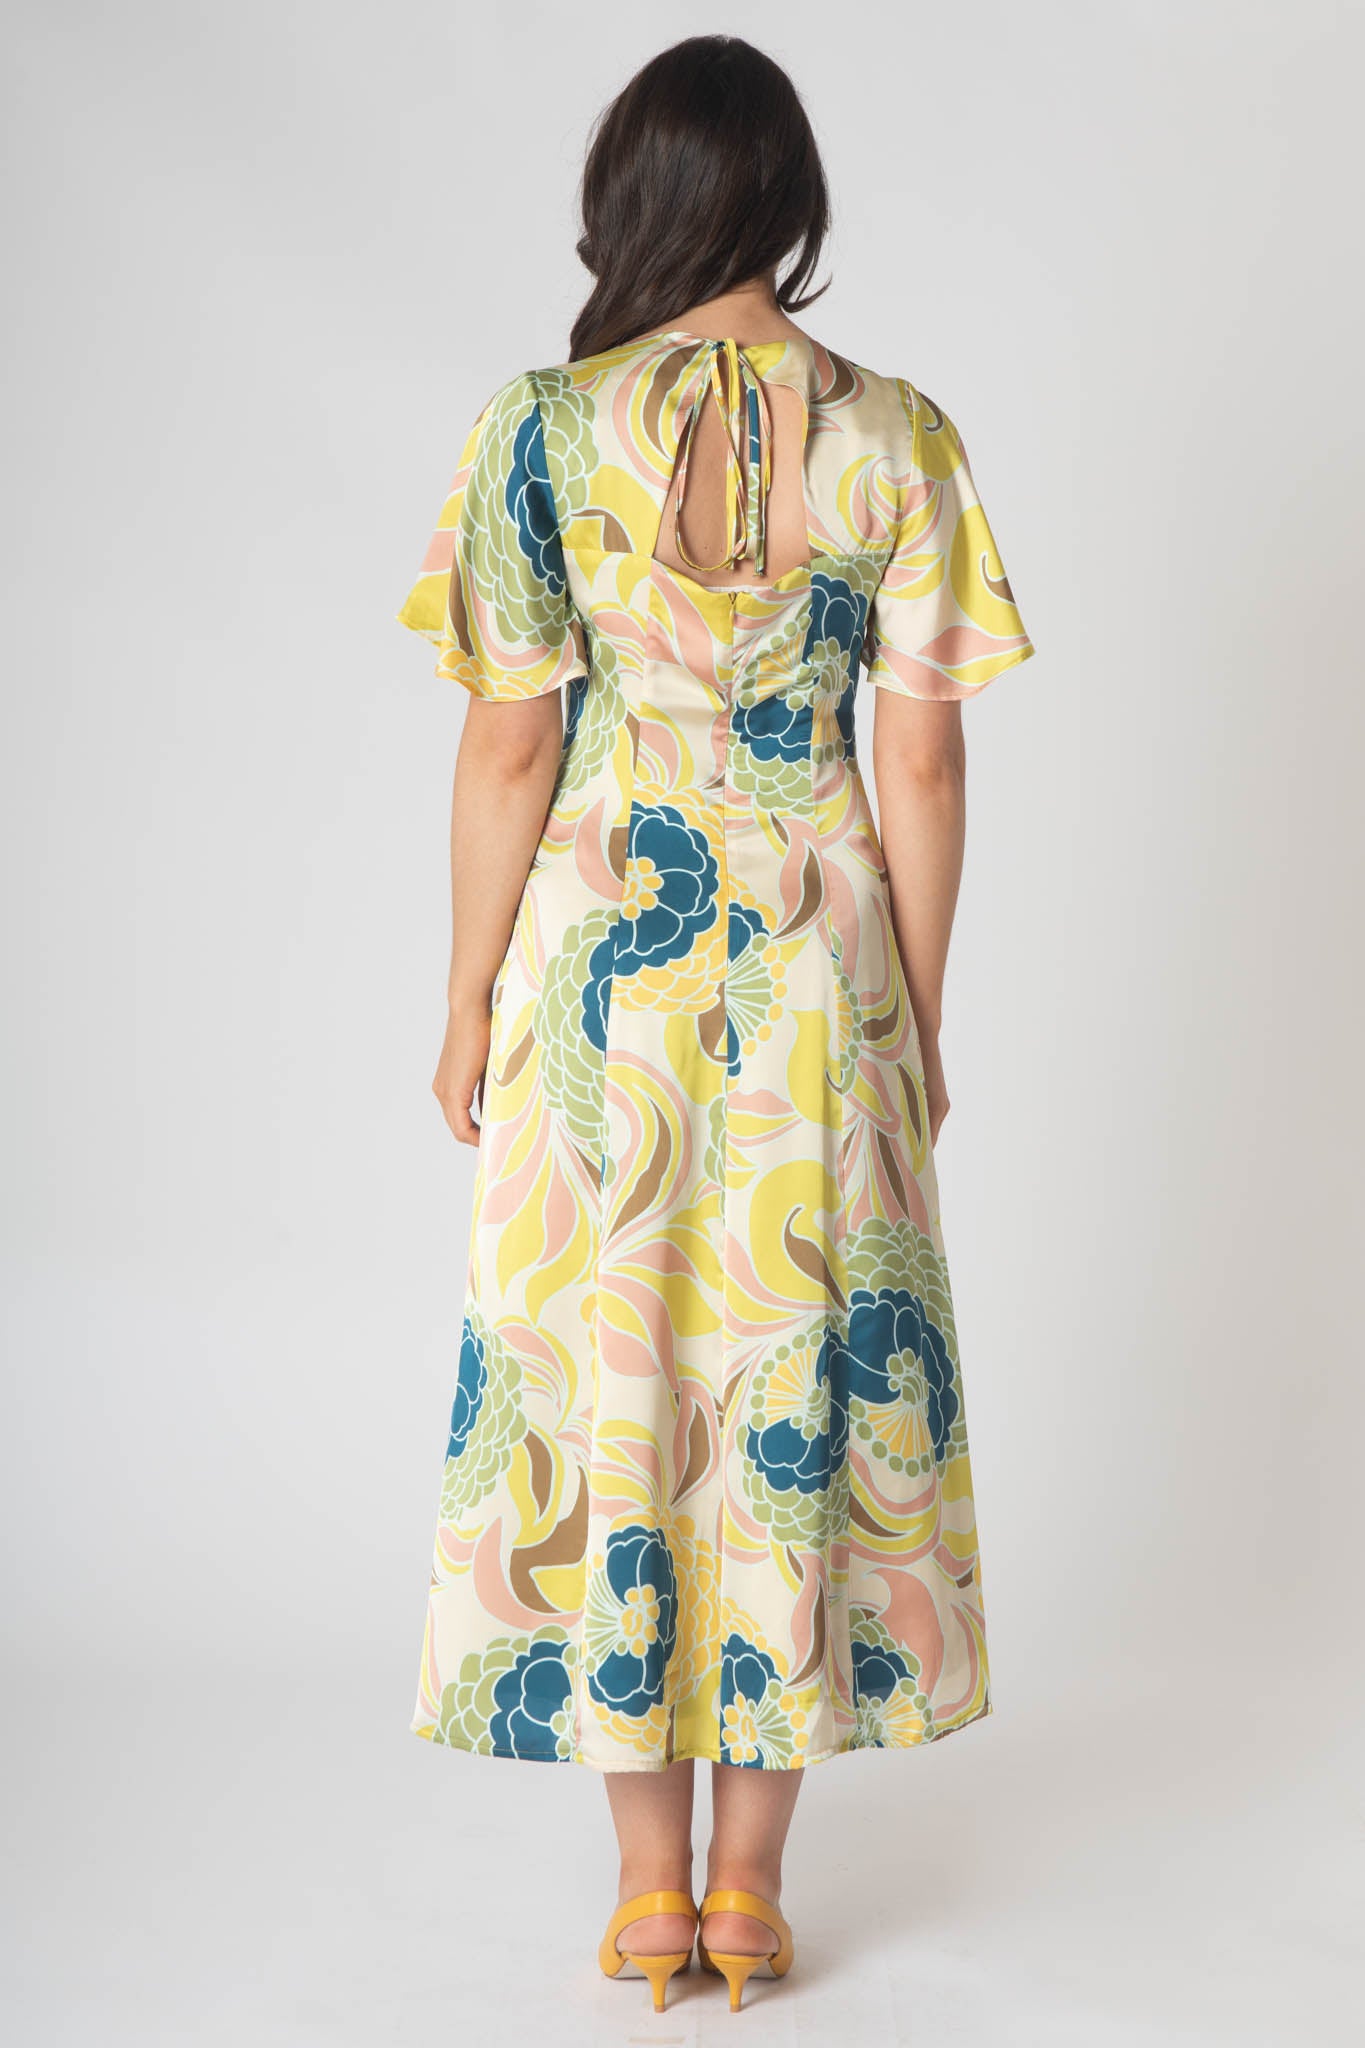 Caprice V-neck Dress with Empire Waist and Loose Half Sleeves - Yellow & Blue